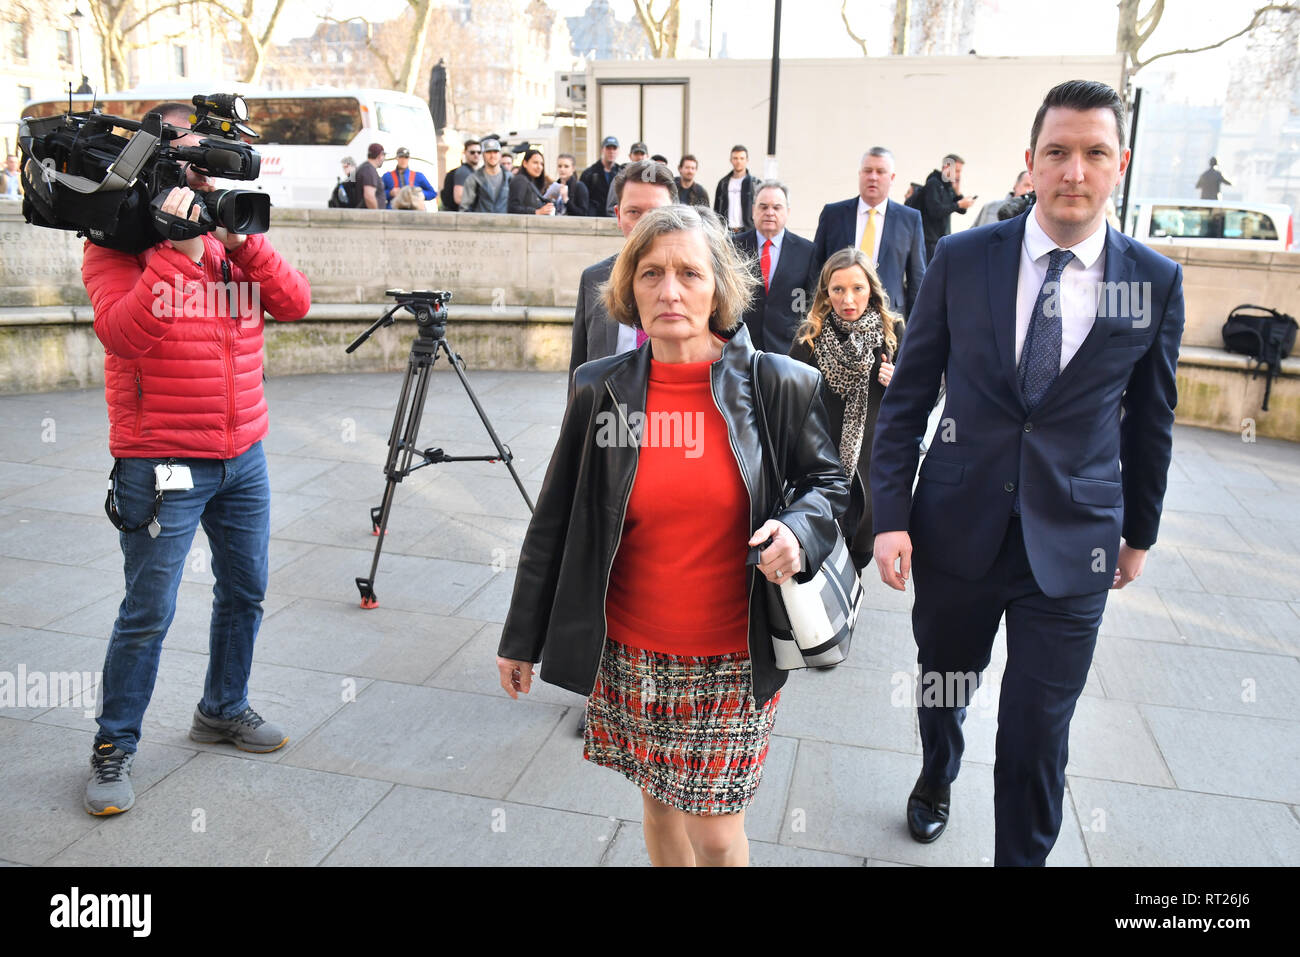 Geraldine Finucane, the widow of murdered Belfast solicitor Pat Finucane, arrives at the Supreme Court in central London, prior to the UK's highest court, ruling on a application brought by the family, which challenges the Government's decision not to establish a public inquiry into the paramilitary murder of the solicitor in 1989, but instead to appoint Sir Desmond de Silva to conduct an independent review into the circumstances of the murder. Stock Photo